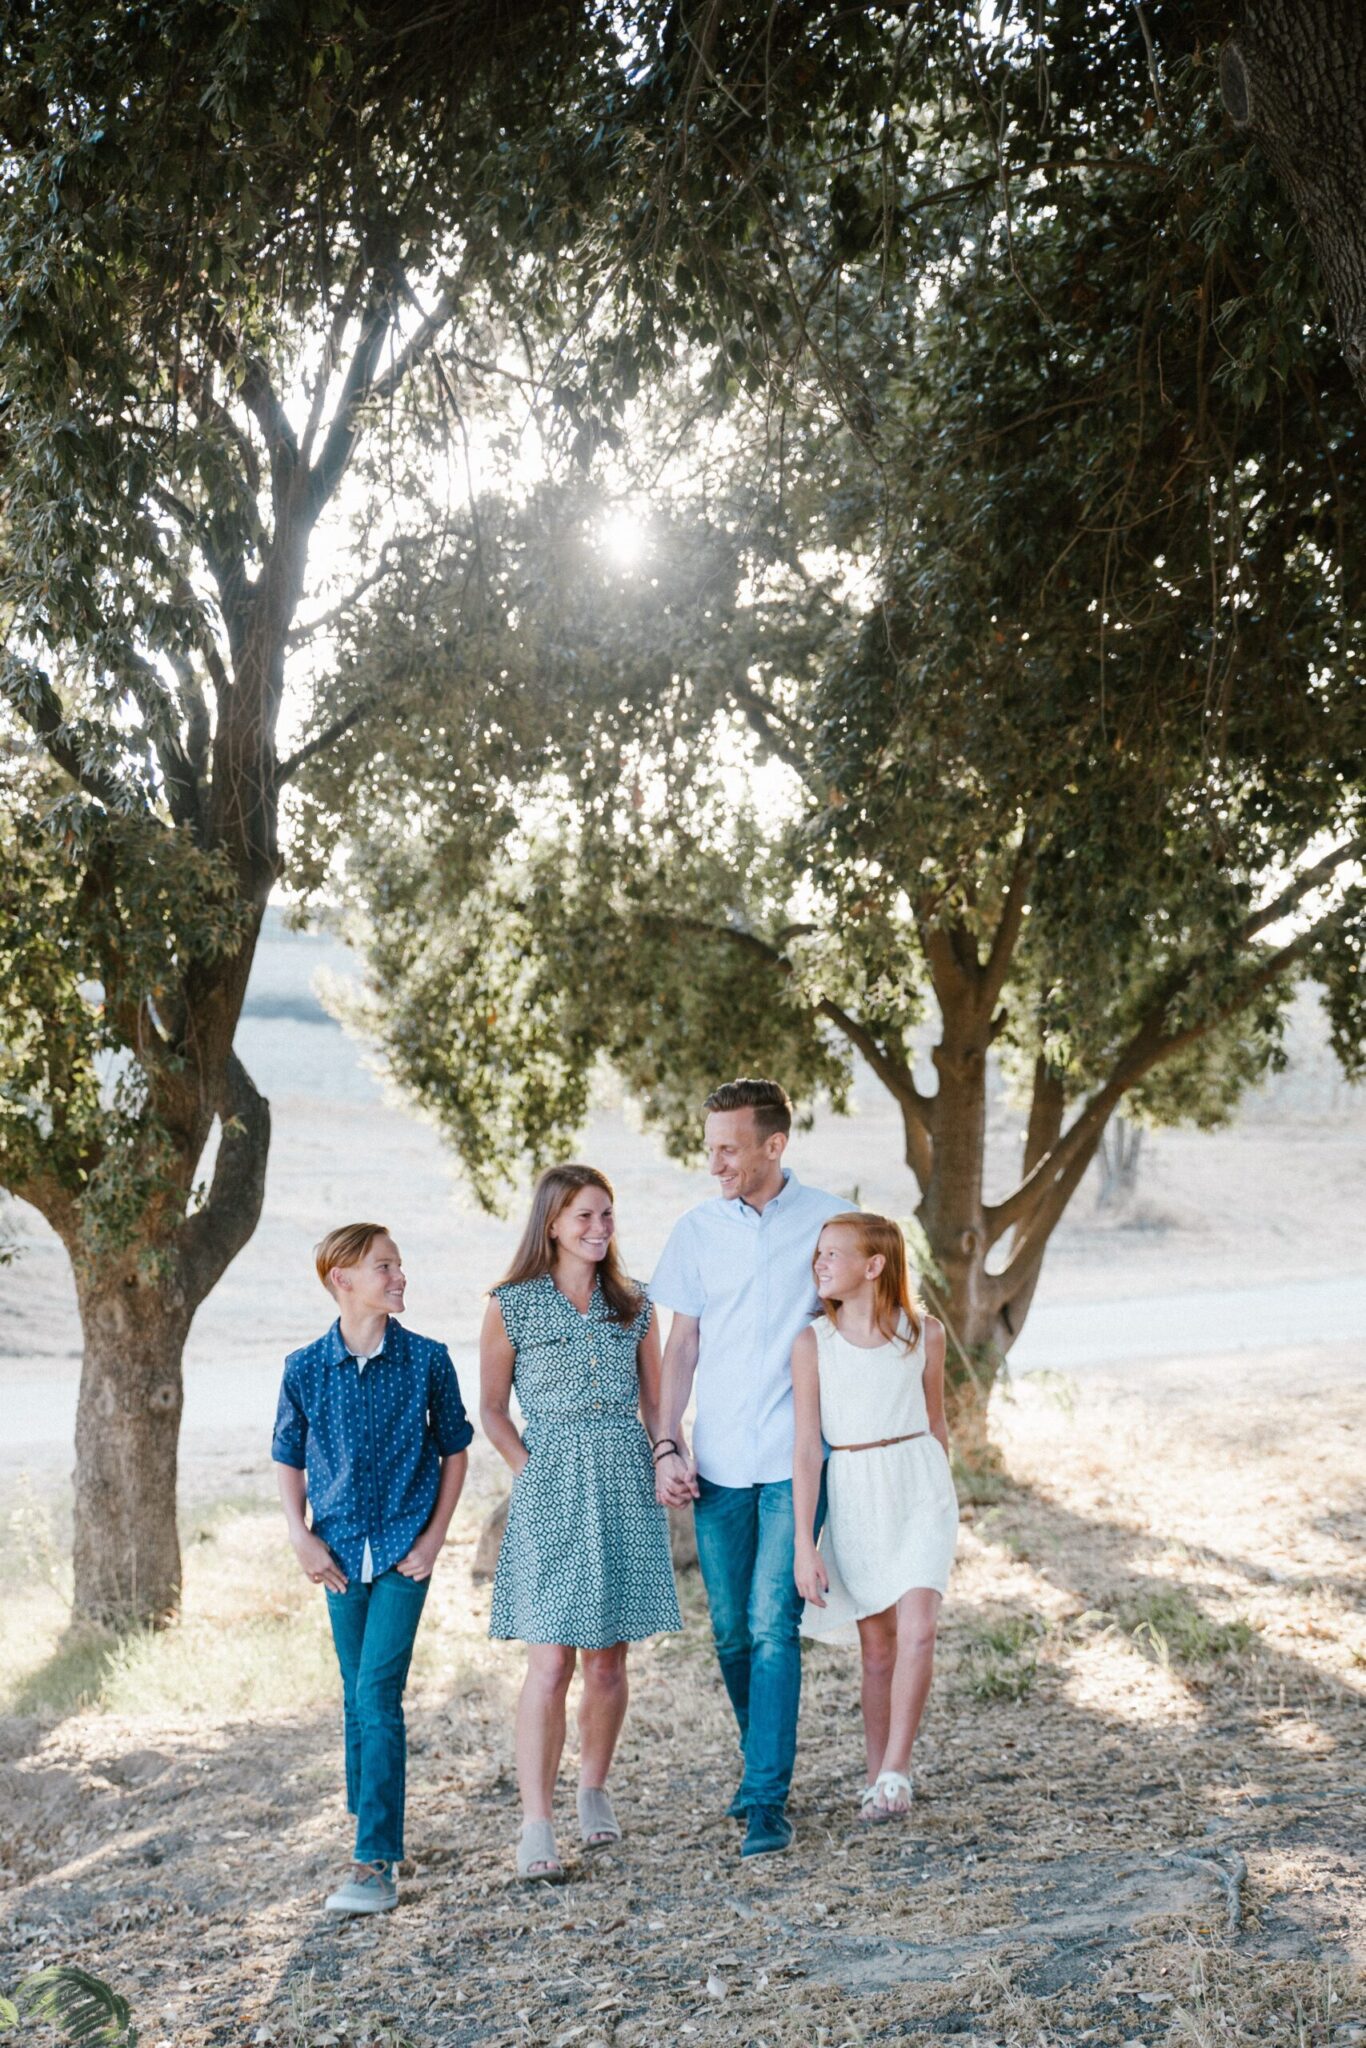 A family of four walks hand in hand under the trees, with sunlight filtering through the leaves on their way to an affordable Dallas dentist.